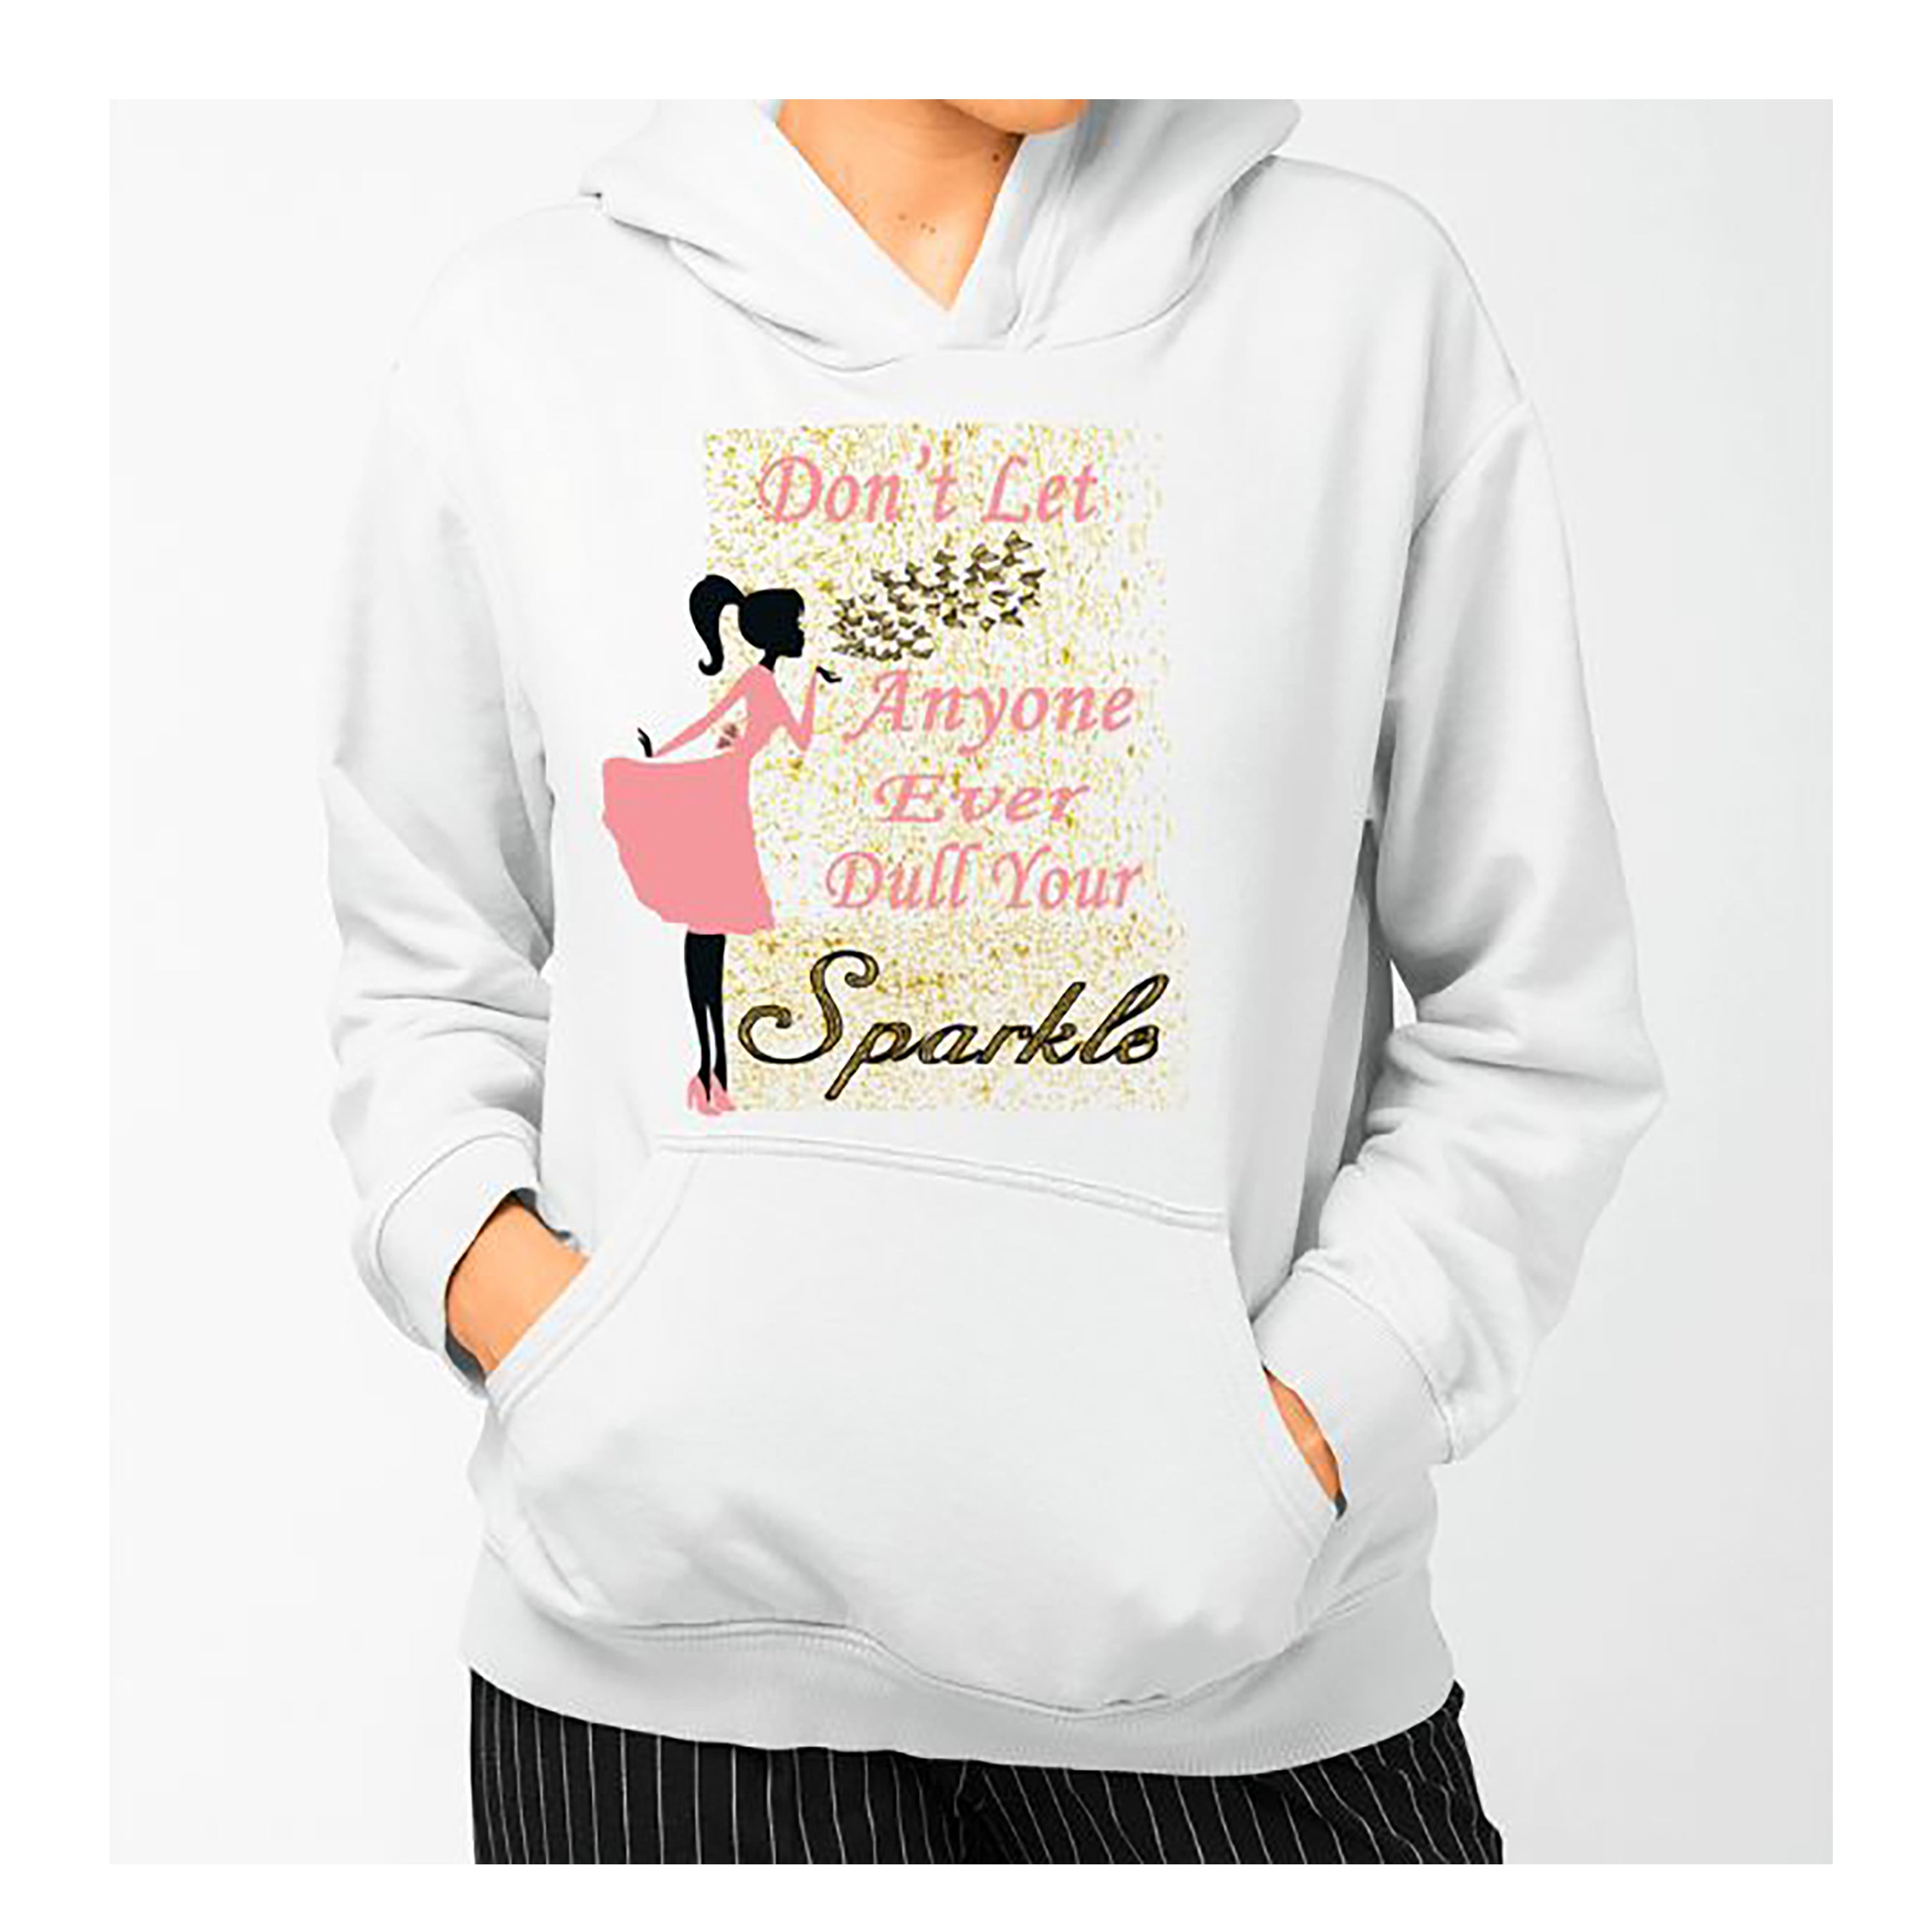 "DON'T LET ANYONE EVER DULL YOUR SPARKEL" Hoodie & Sweatshirt